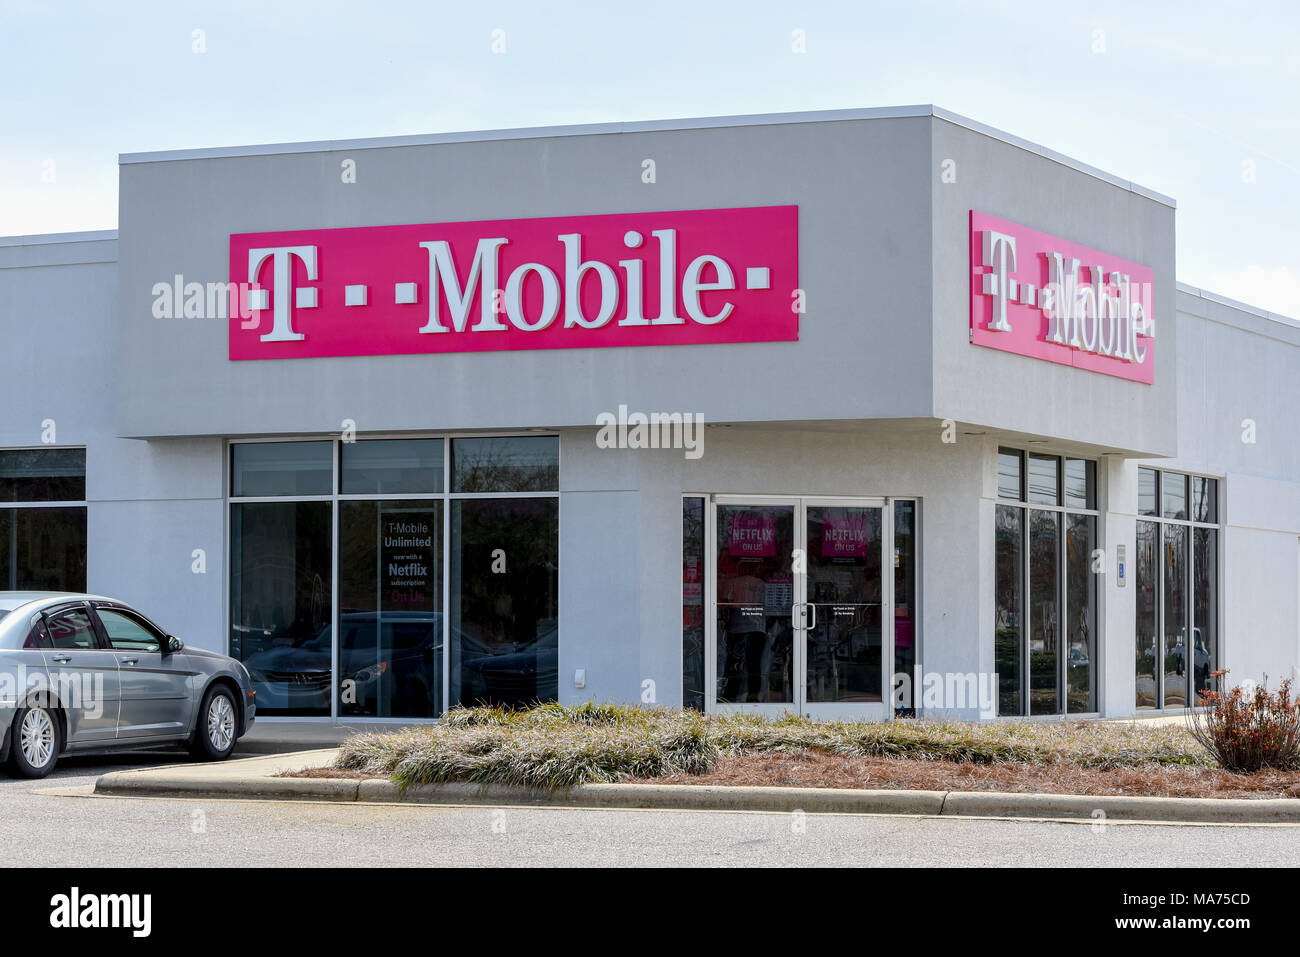 Wilson, NC / March 29, 2018: A T Mobile wireless service location is open in Wilson, North Carolina. Stock Photo